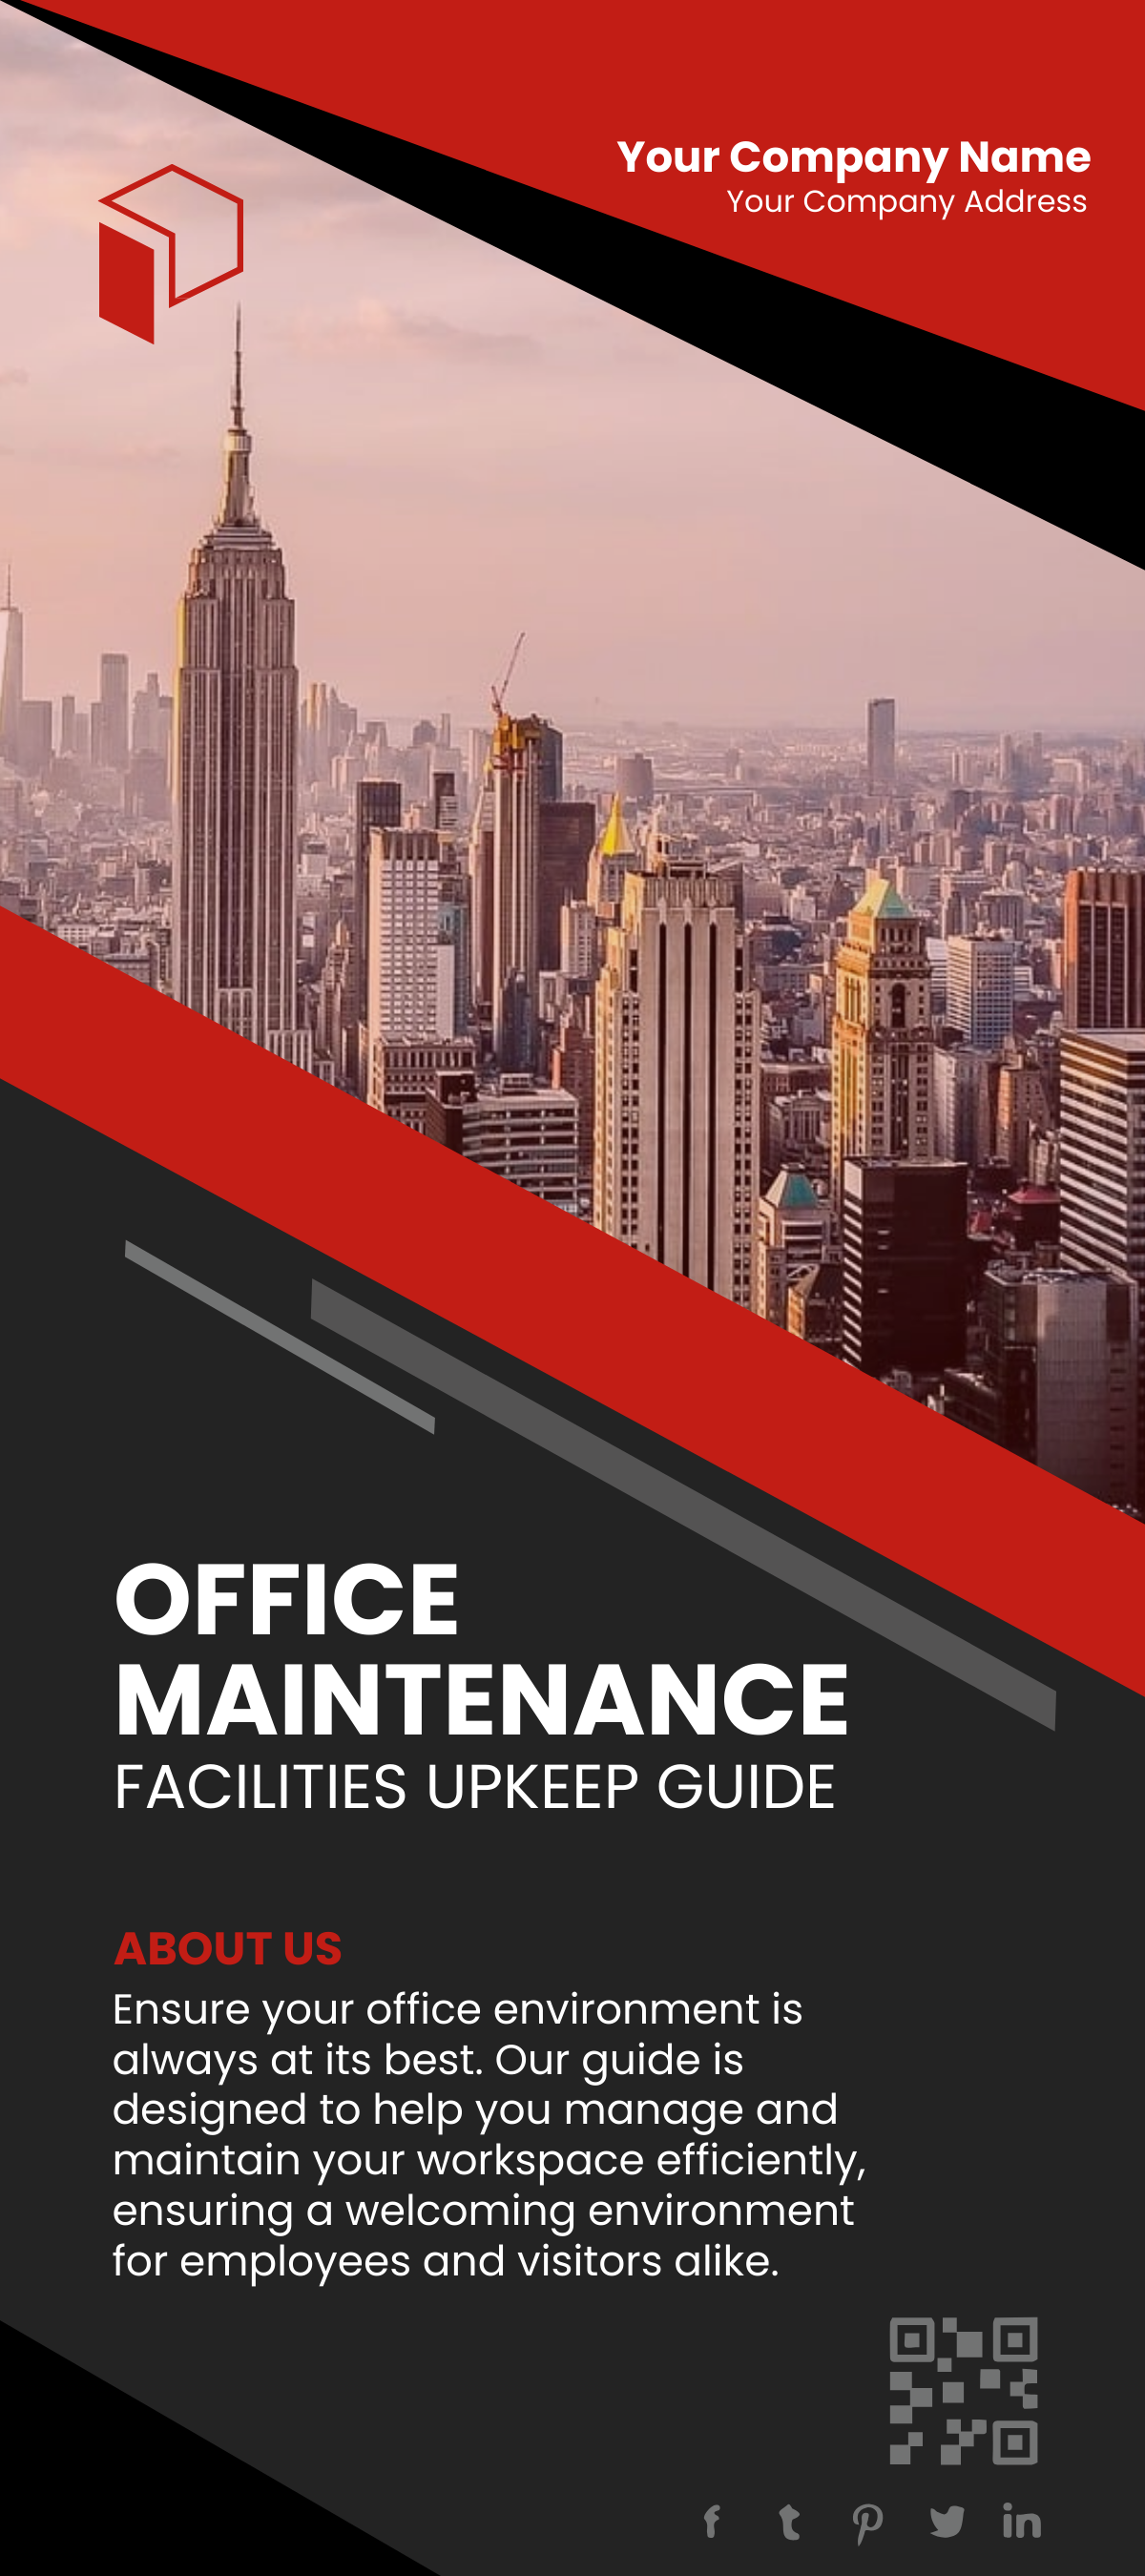 Free Office Maintenance and Facilities Upkeep Guide Rack Card Template